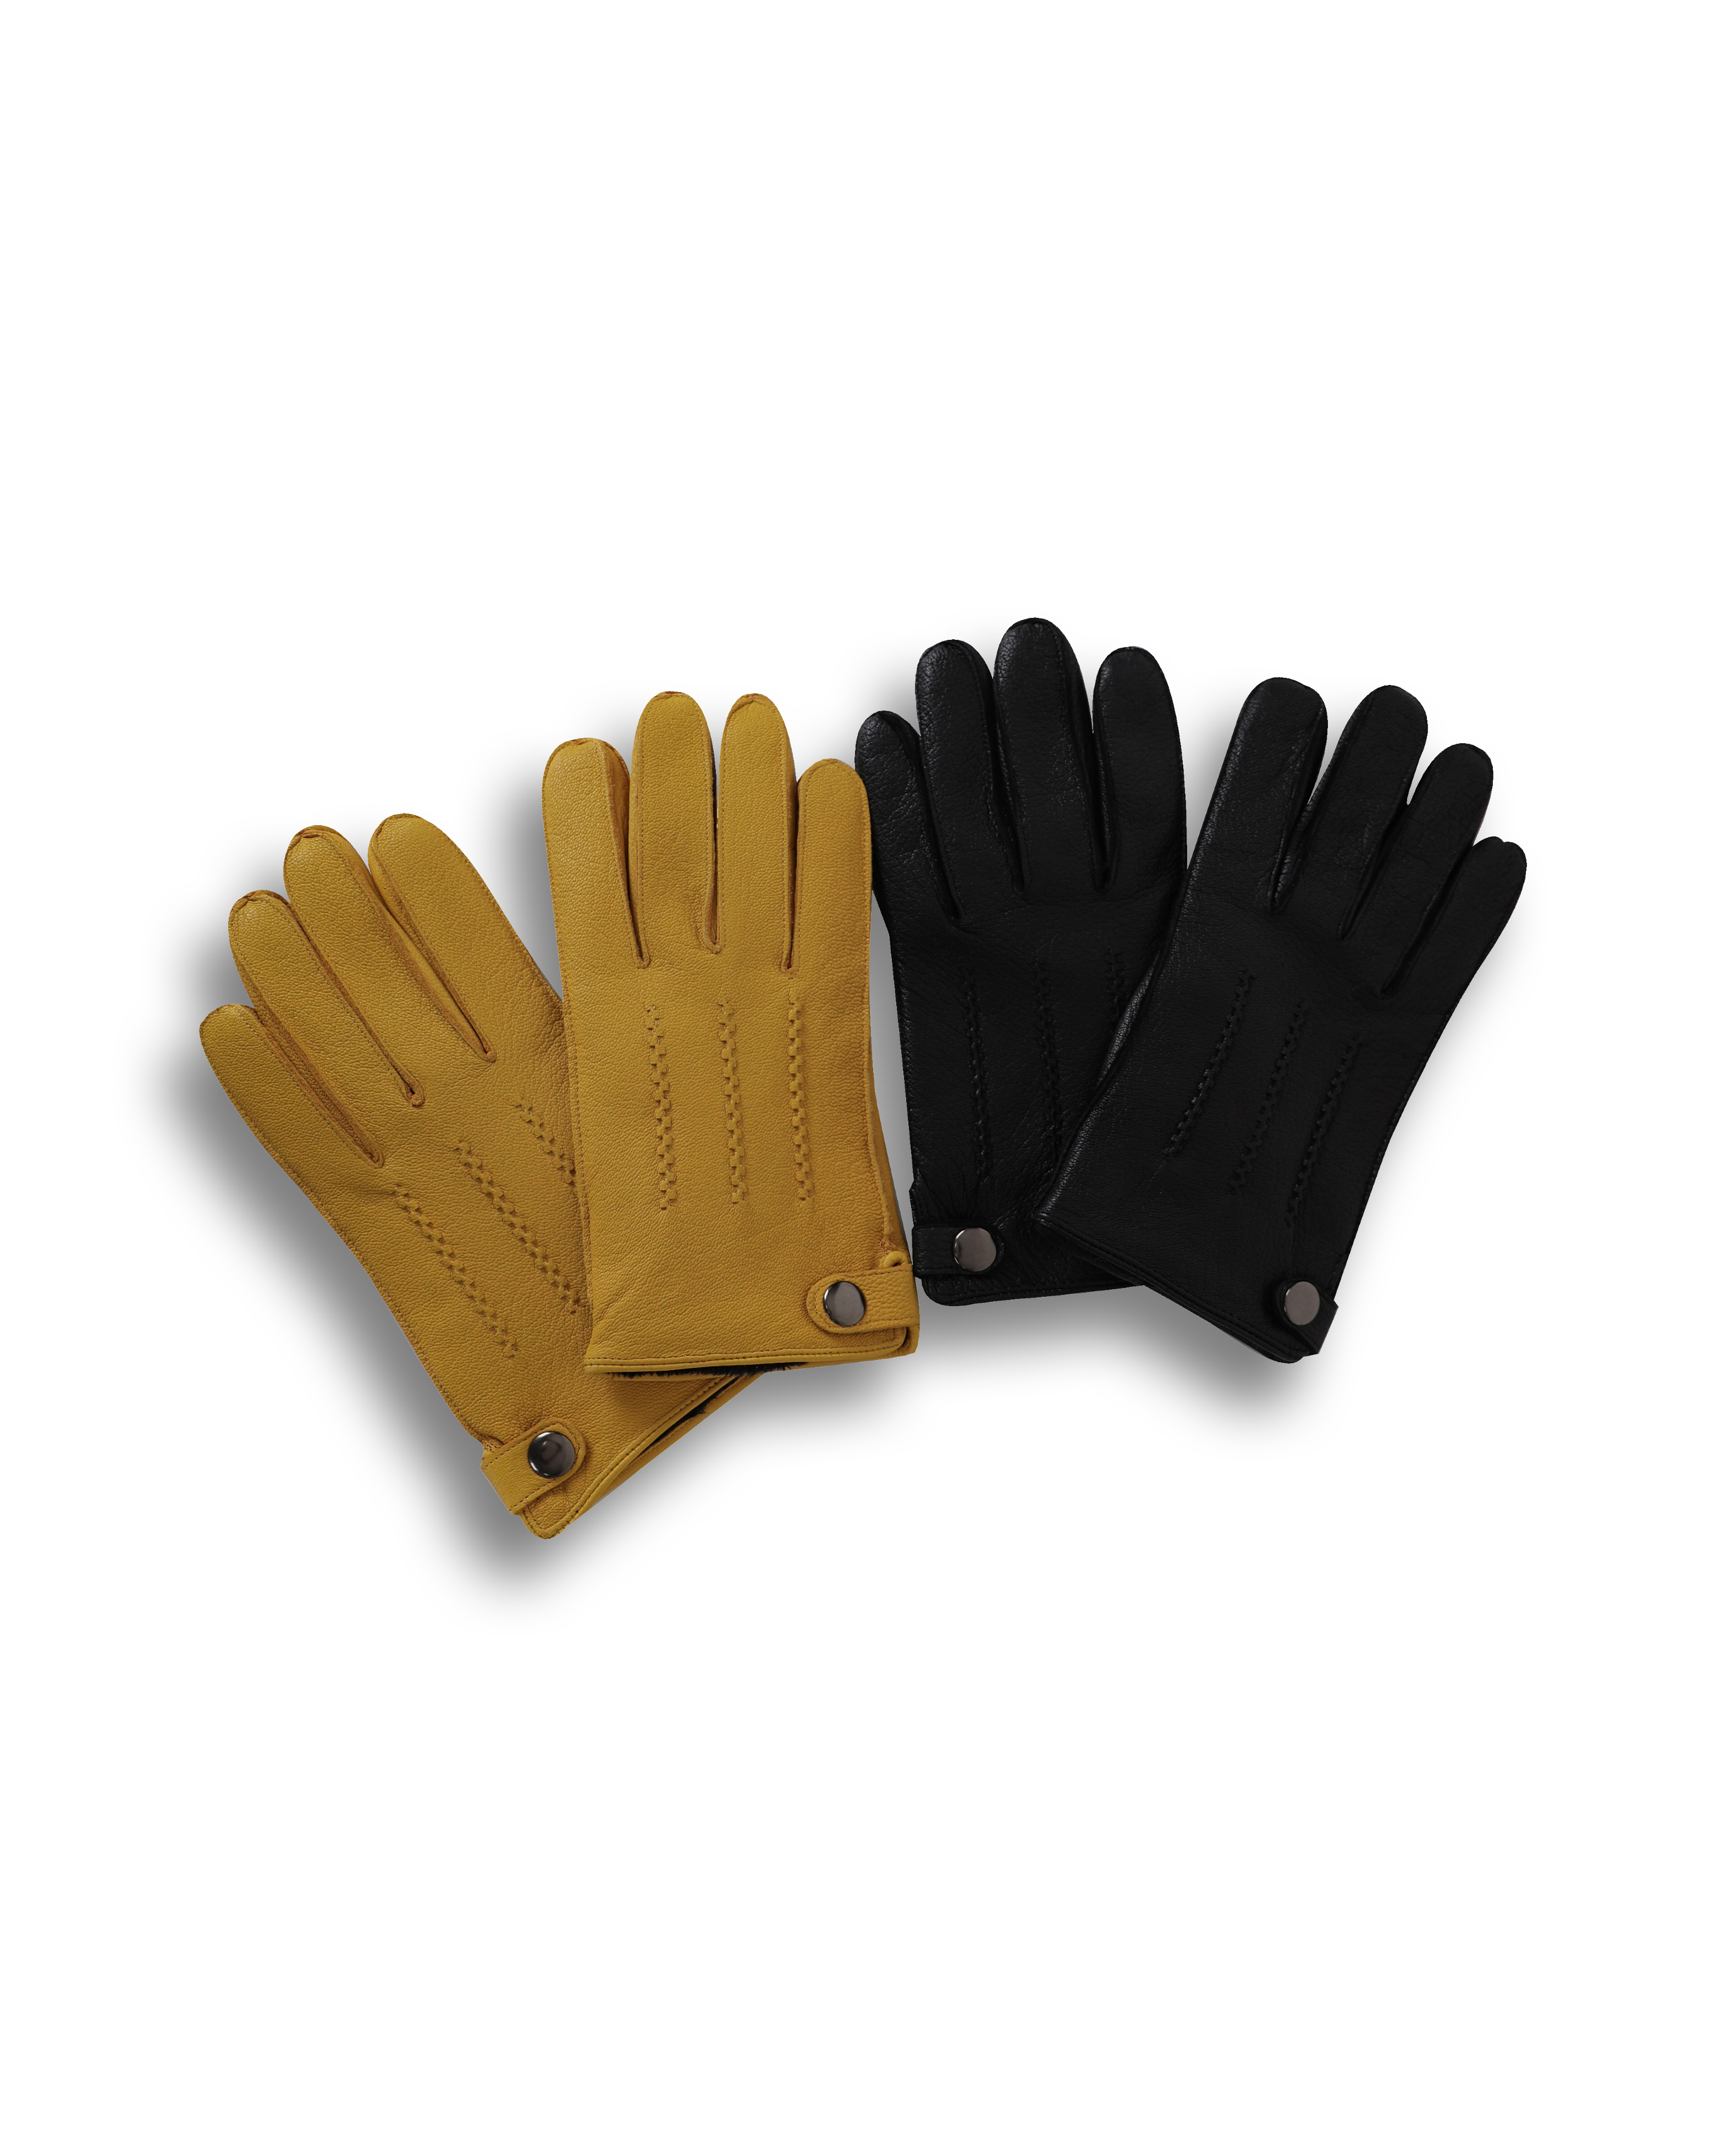 VIDD Pure Leather Winter Gloves (Black/Yellow)